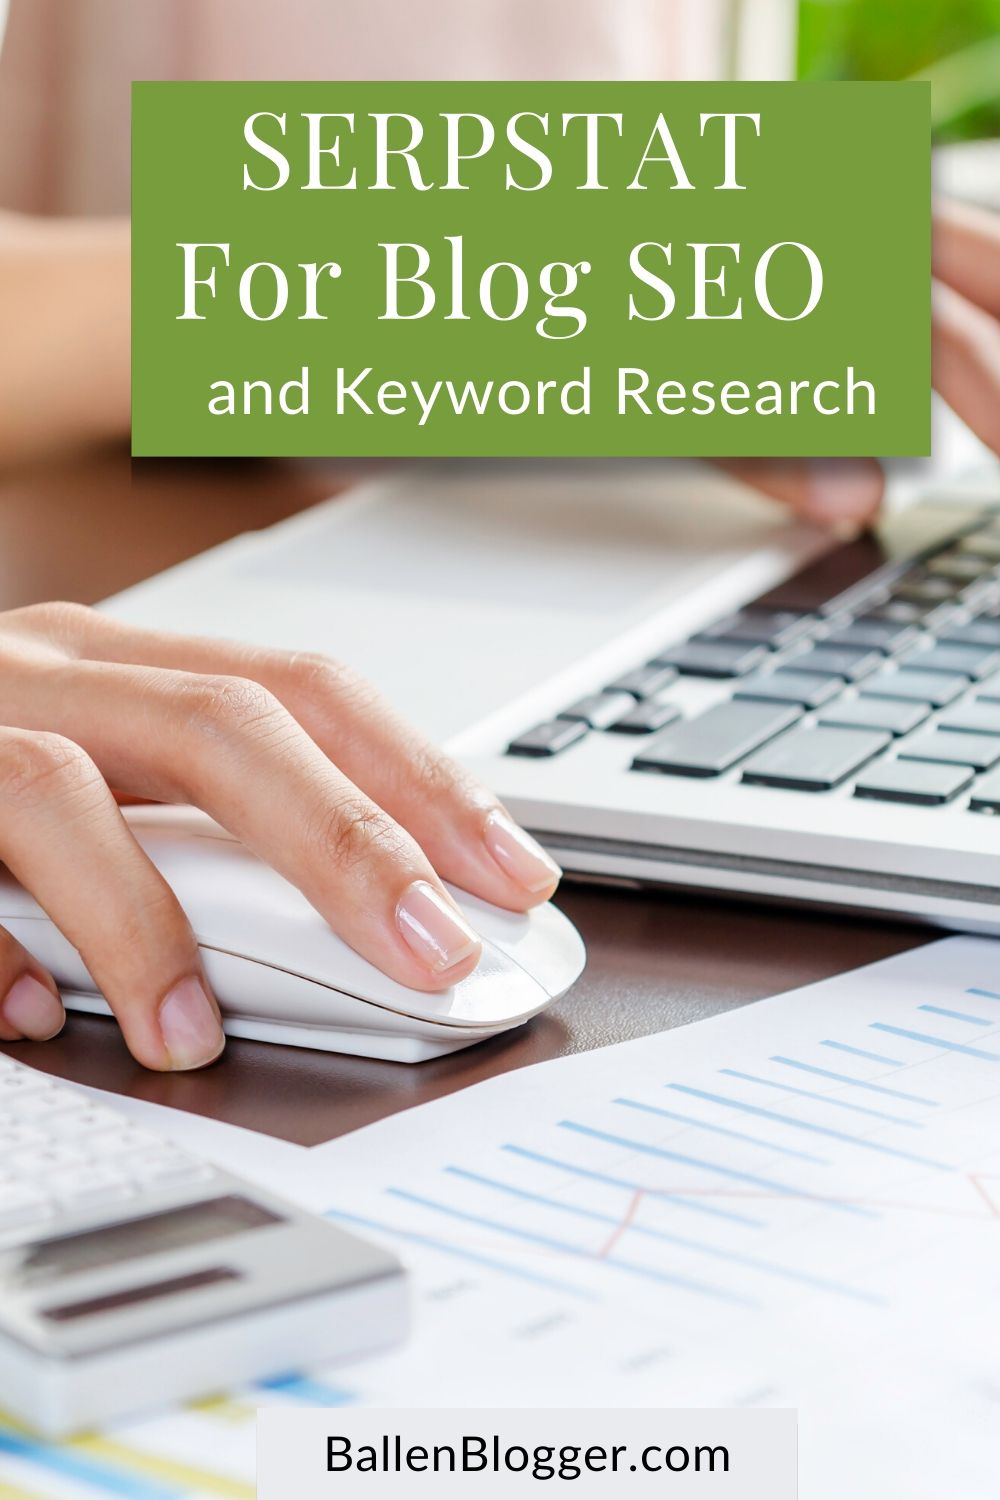 Serpstat is one of the most comprehensive keyword research and SEO platforms on the market.